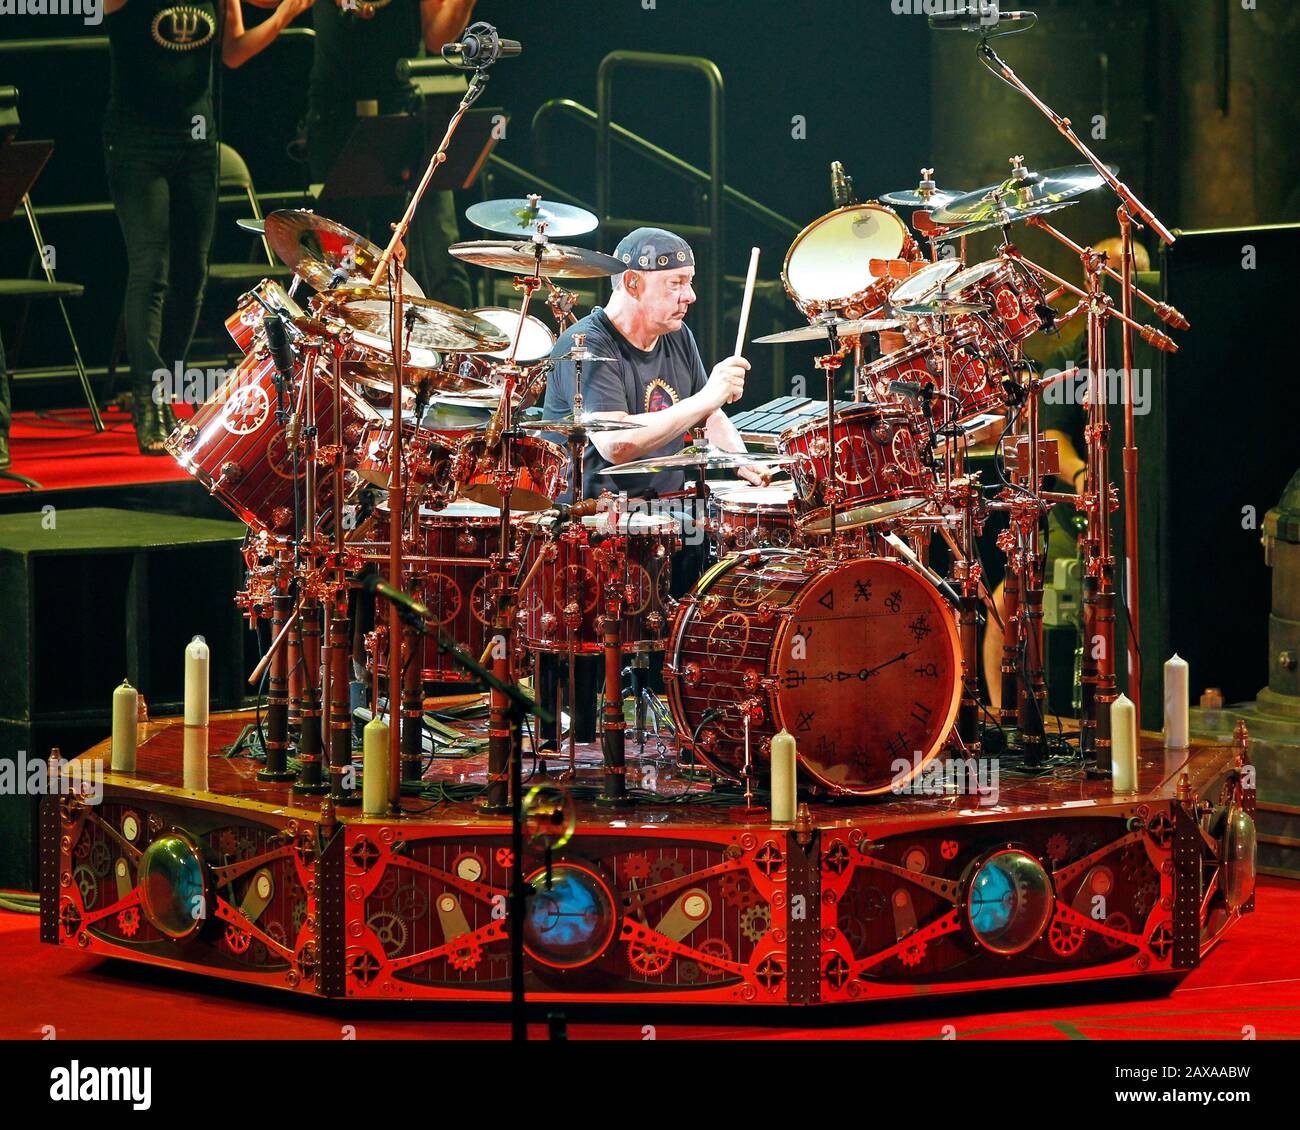 Rush drummer Neil Peart performs with the rest of the band at the BB&T